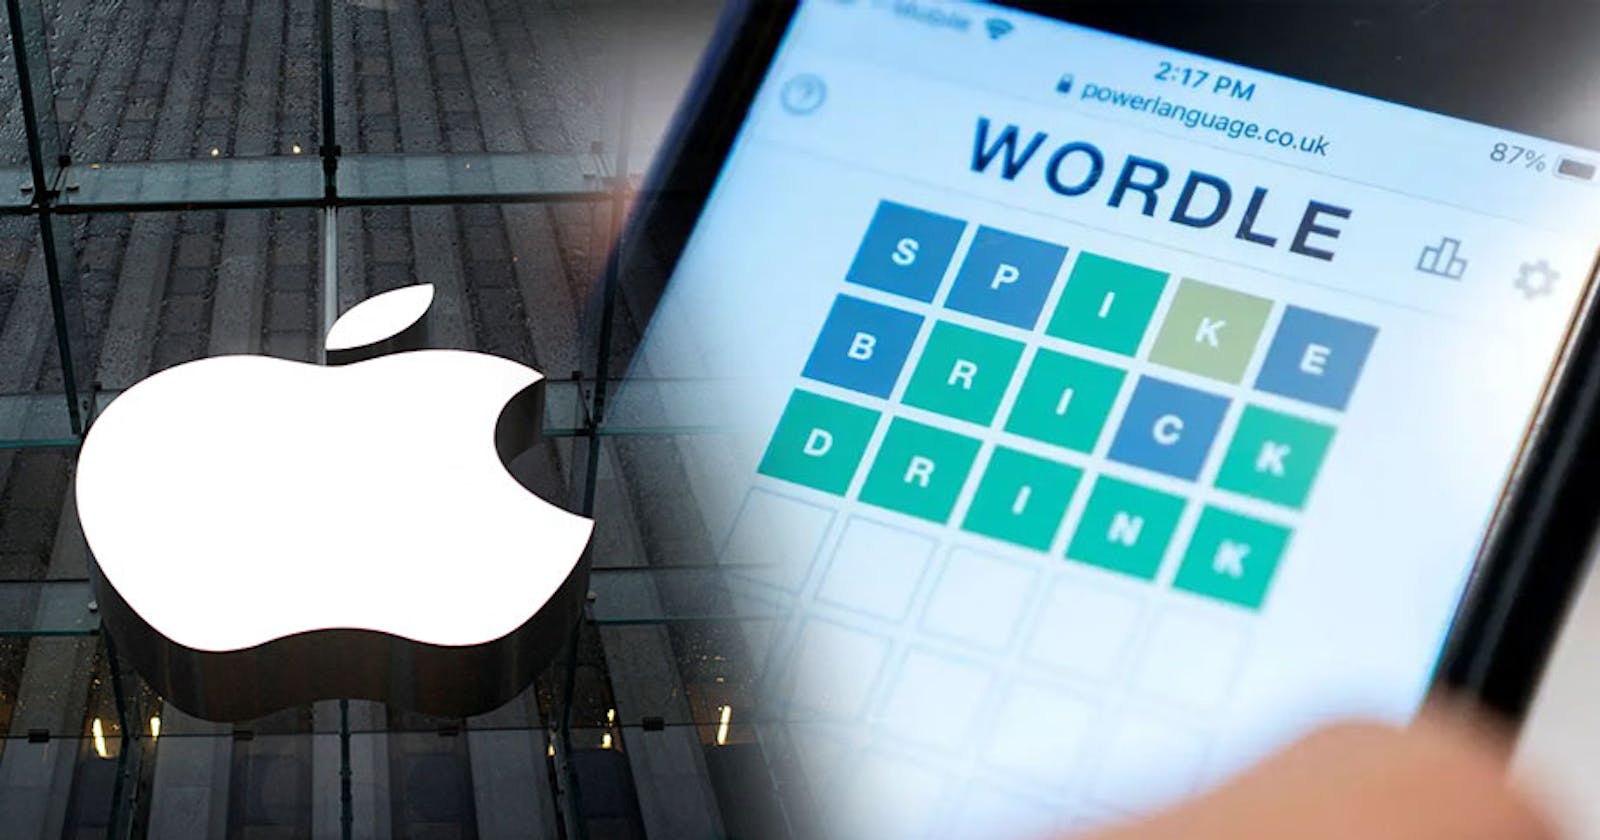 Apple made the right choice to pull Wordle knockoffs from the App Store